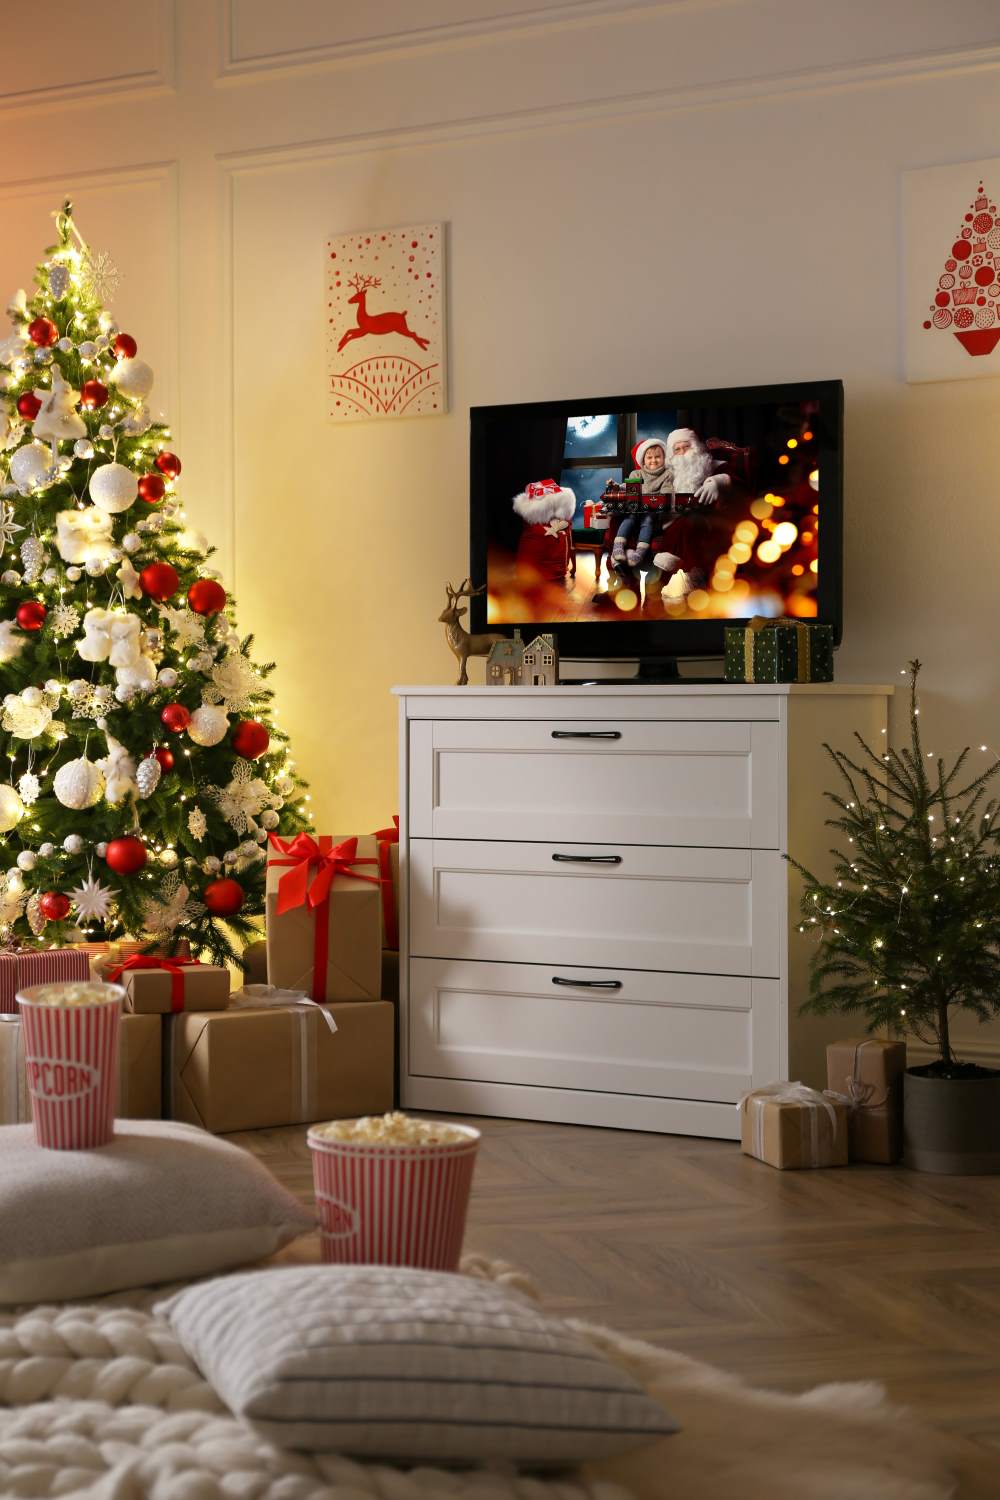 TV on a stand and next to a christmas tree